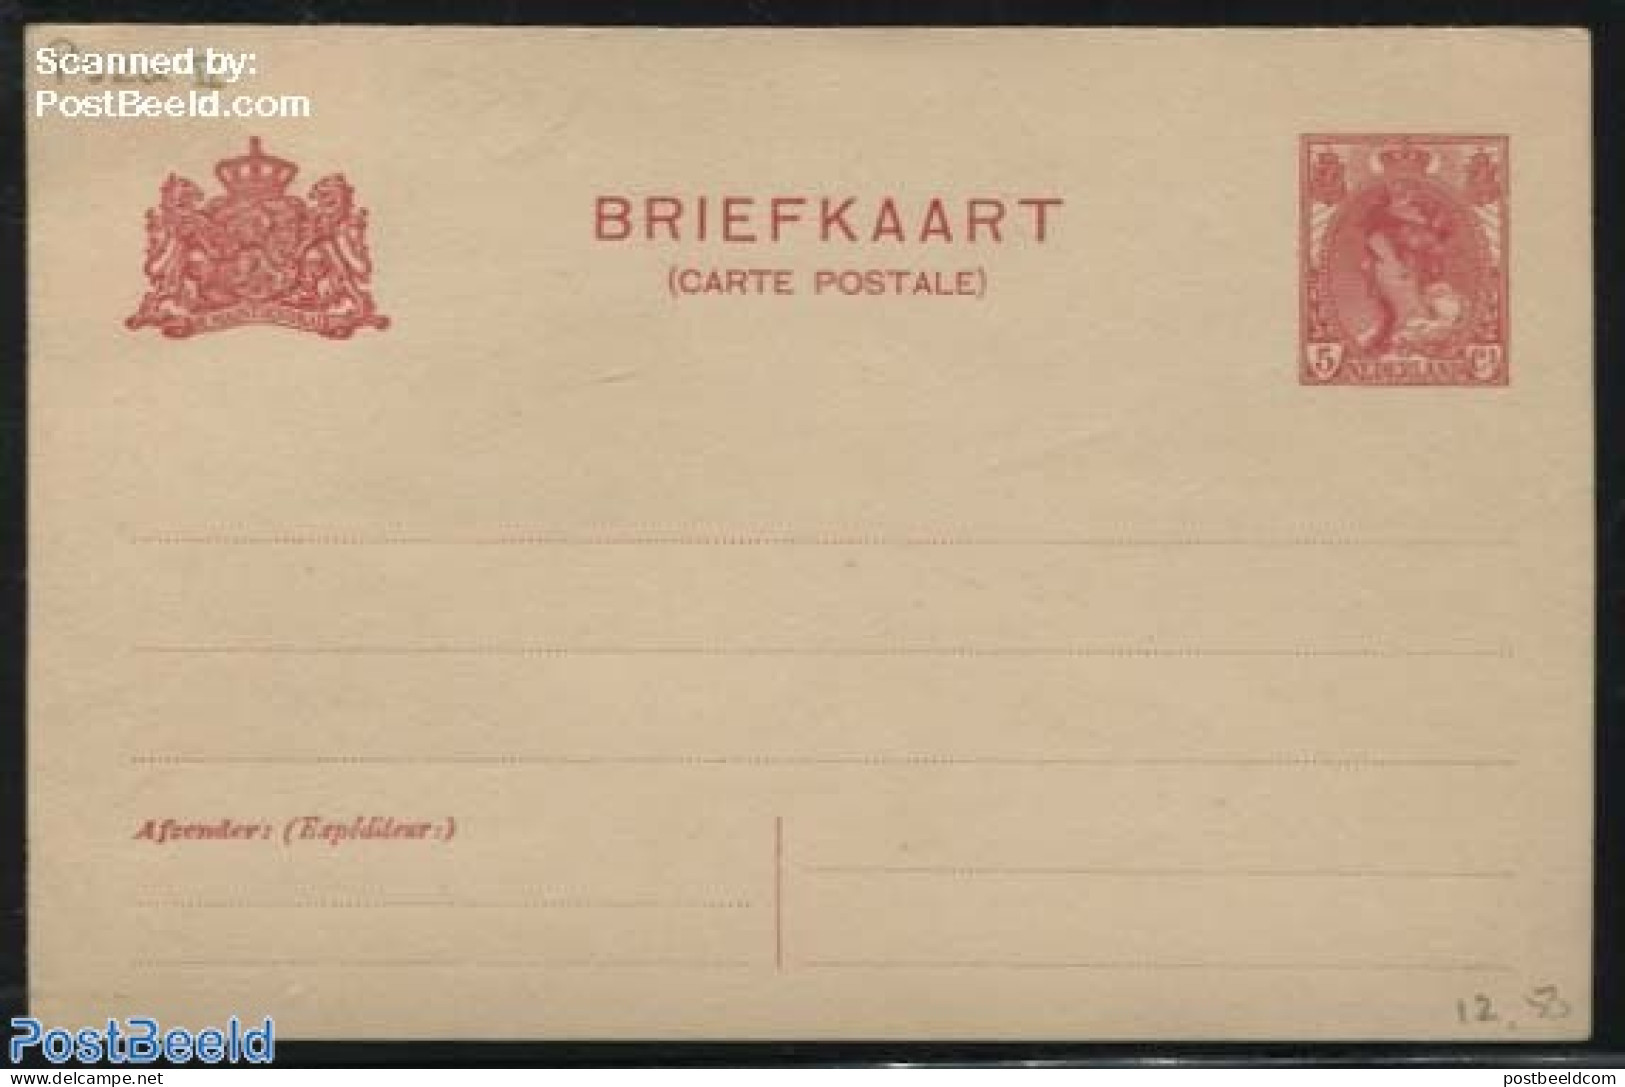 Netherlands 1910 Postcard 5c, Dutch Text Above French Text, Short Dividing Line, Unused Postal Stationary - Covers & Documents